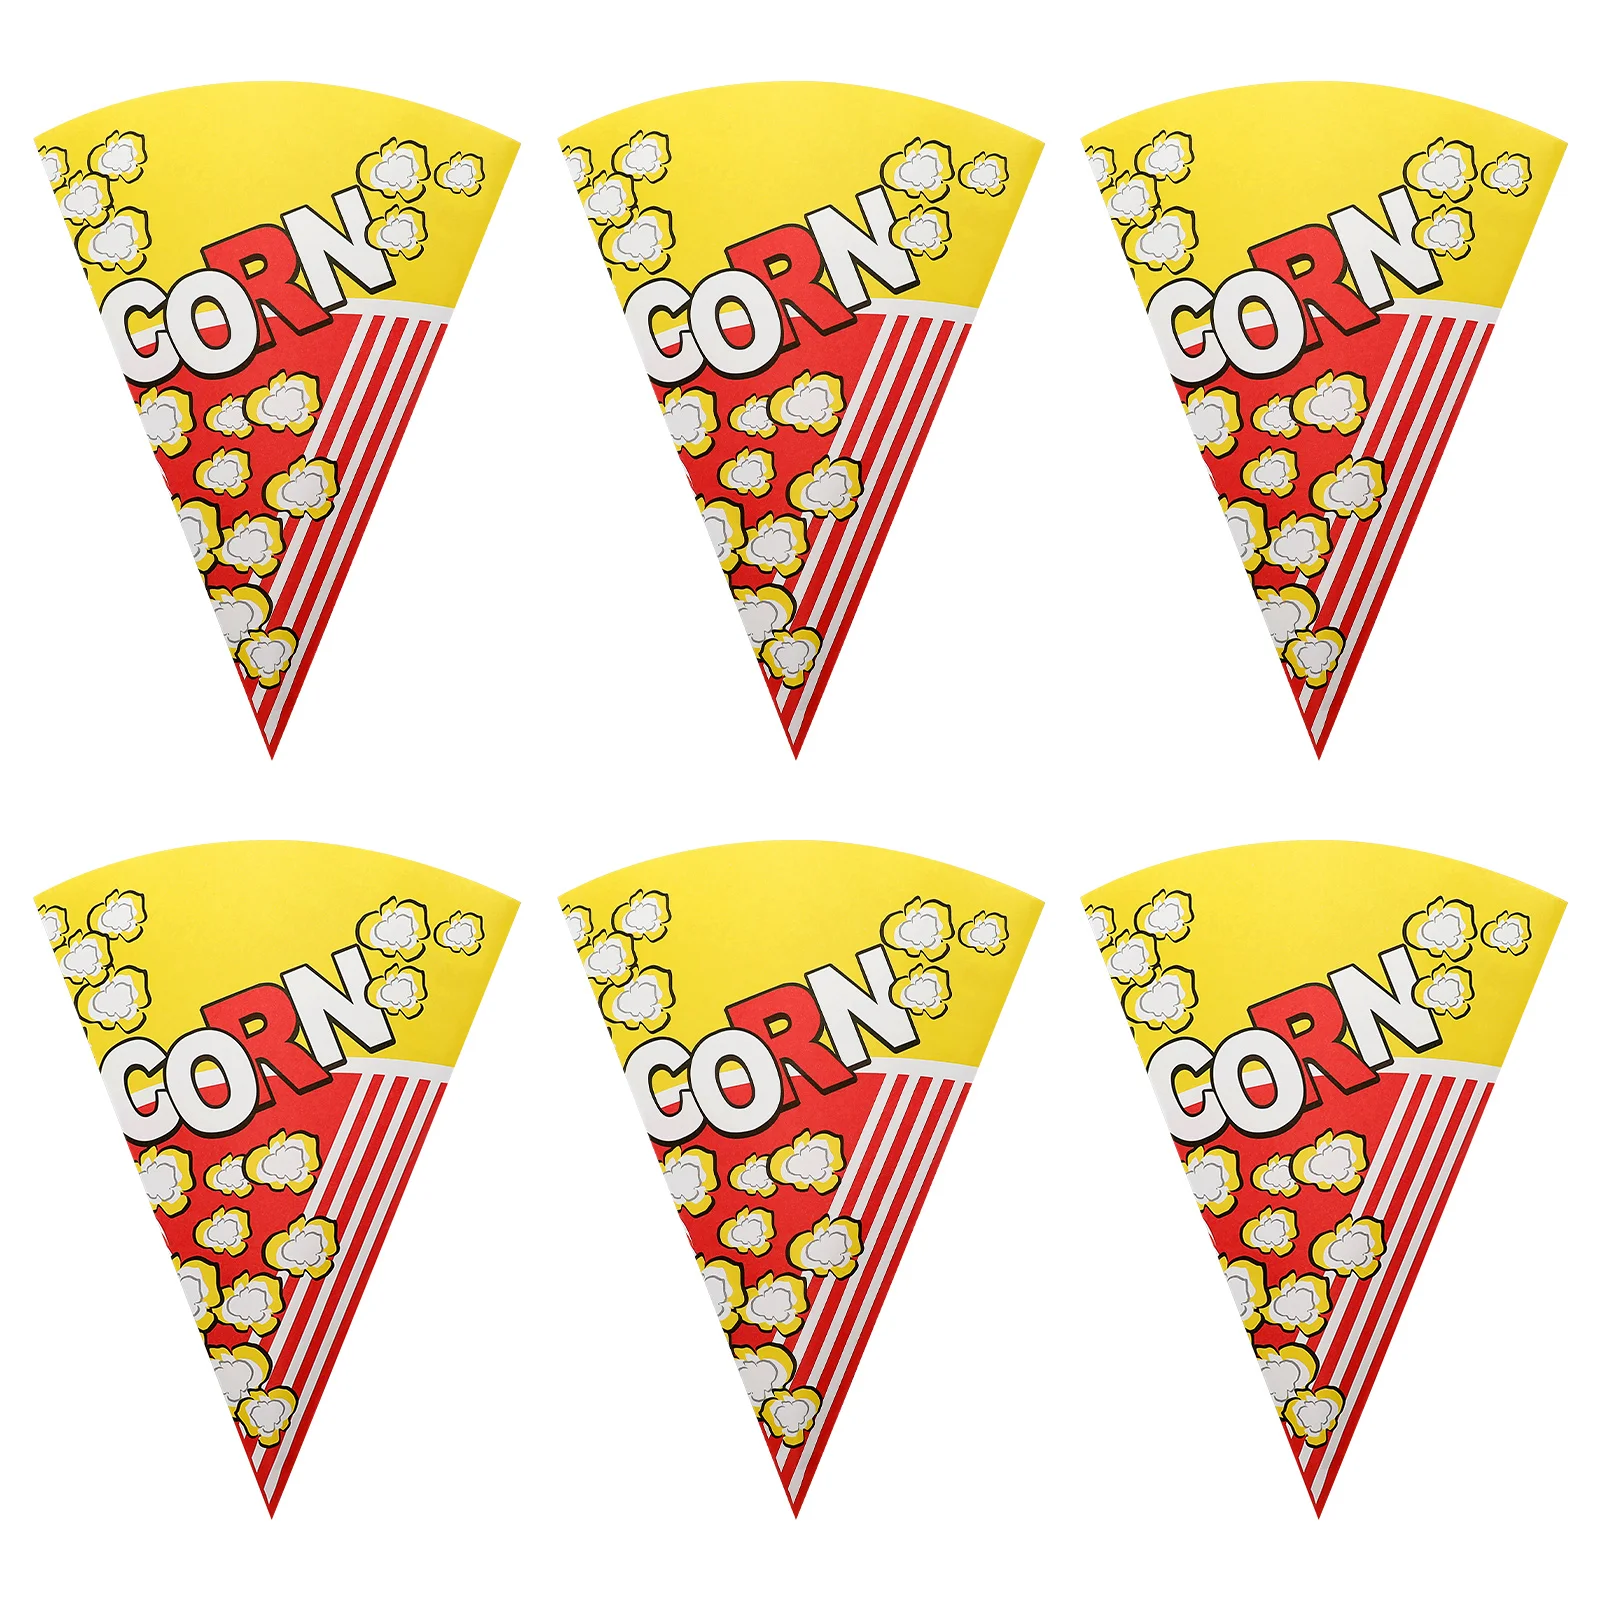 

50pcs Paper Popcorn Bags Cone Shaped Popcorn Treat Bags Party Individual Servings Popcorn Pouches